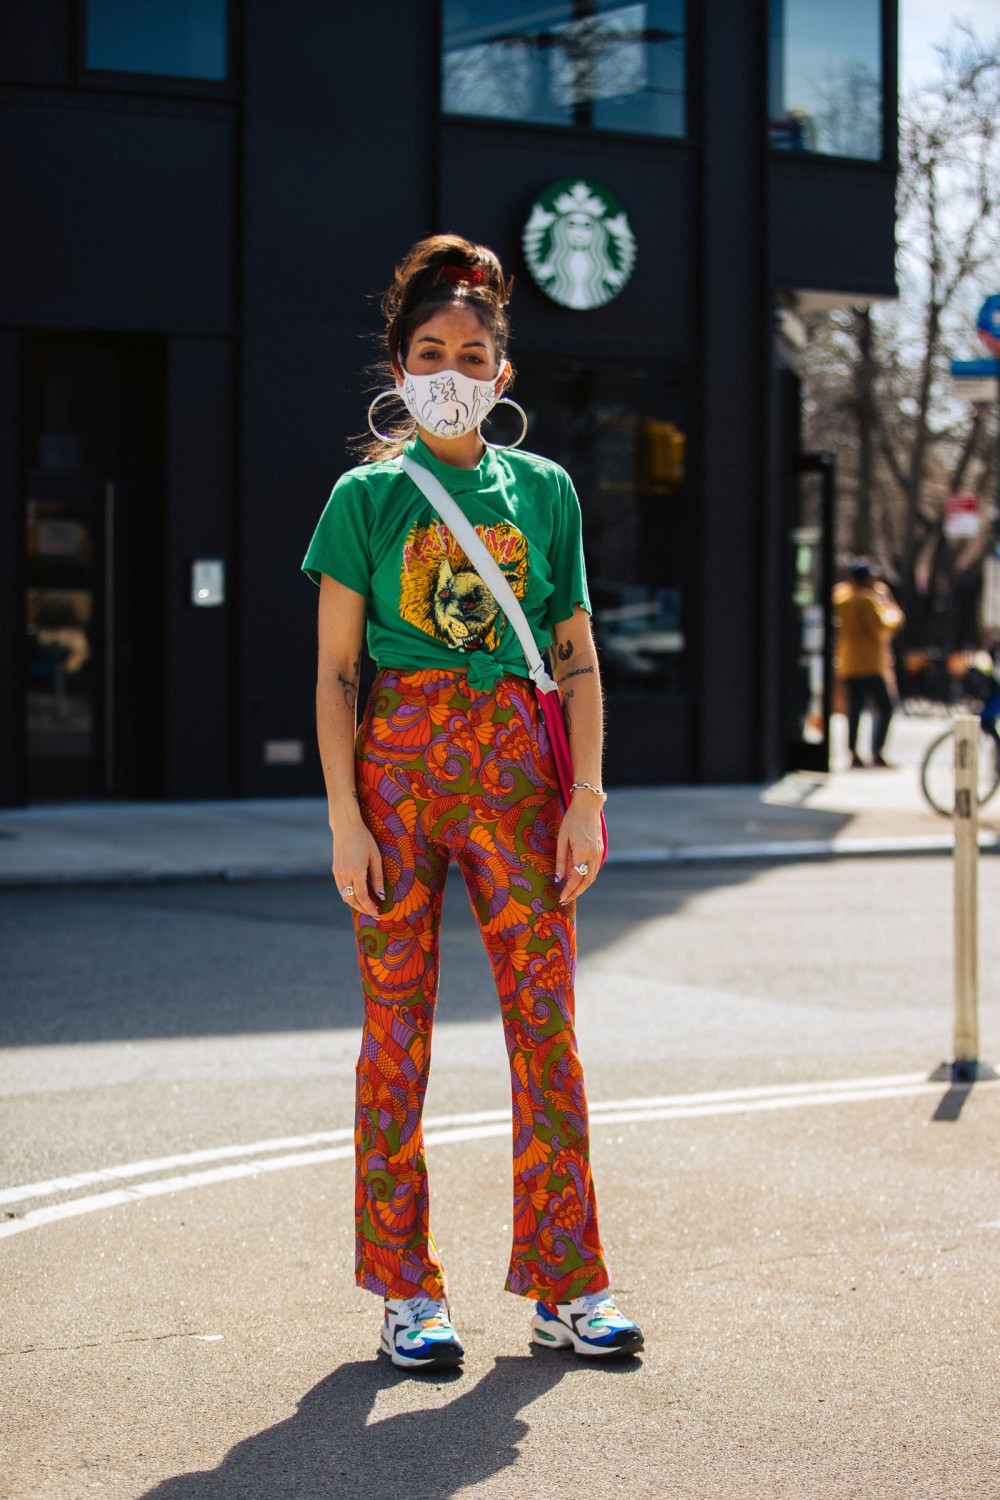 Street Style Is Blossoming Again in New Yorks Parks